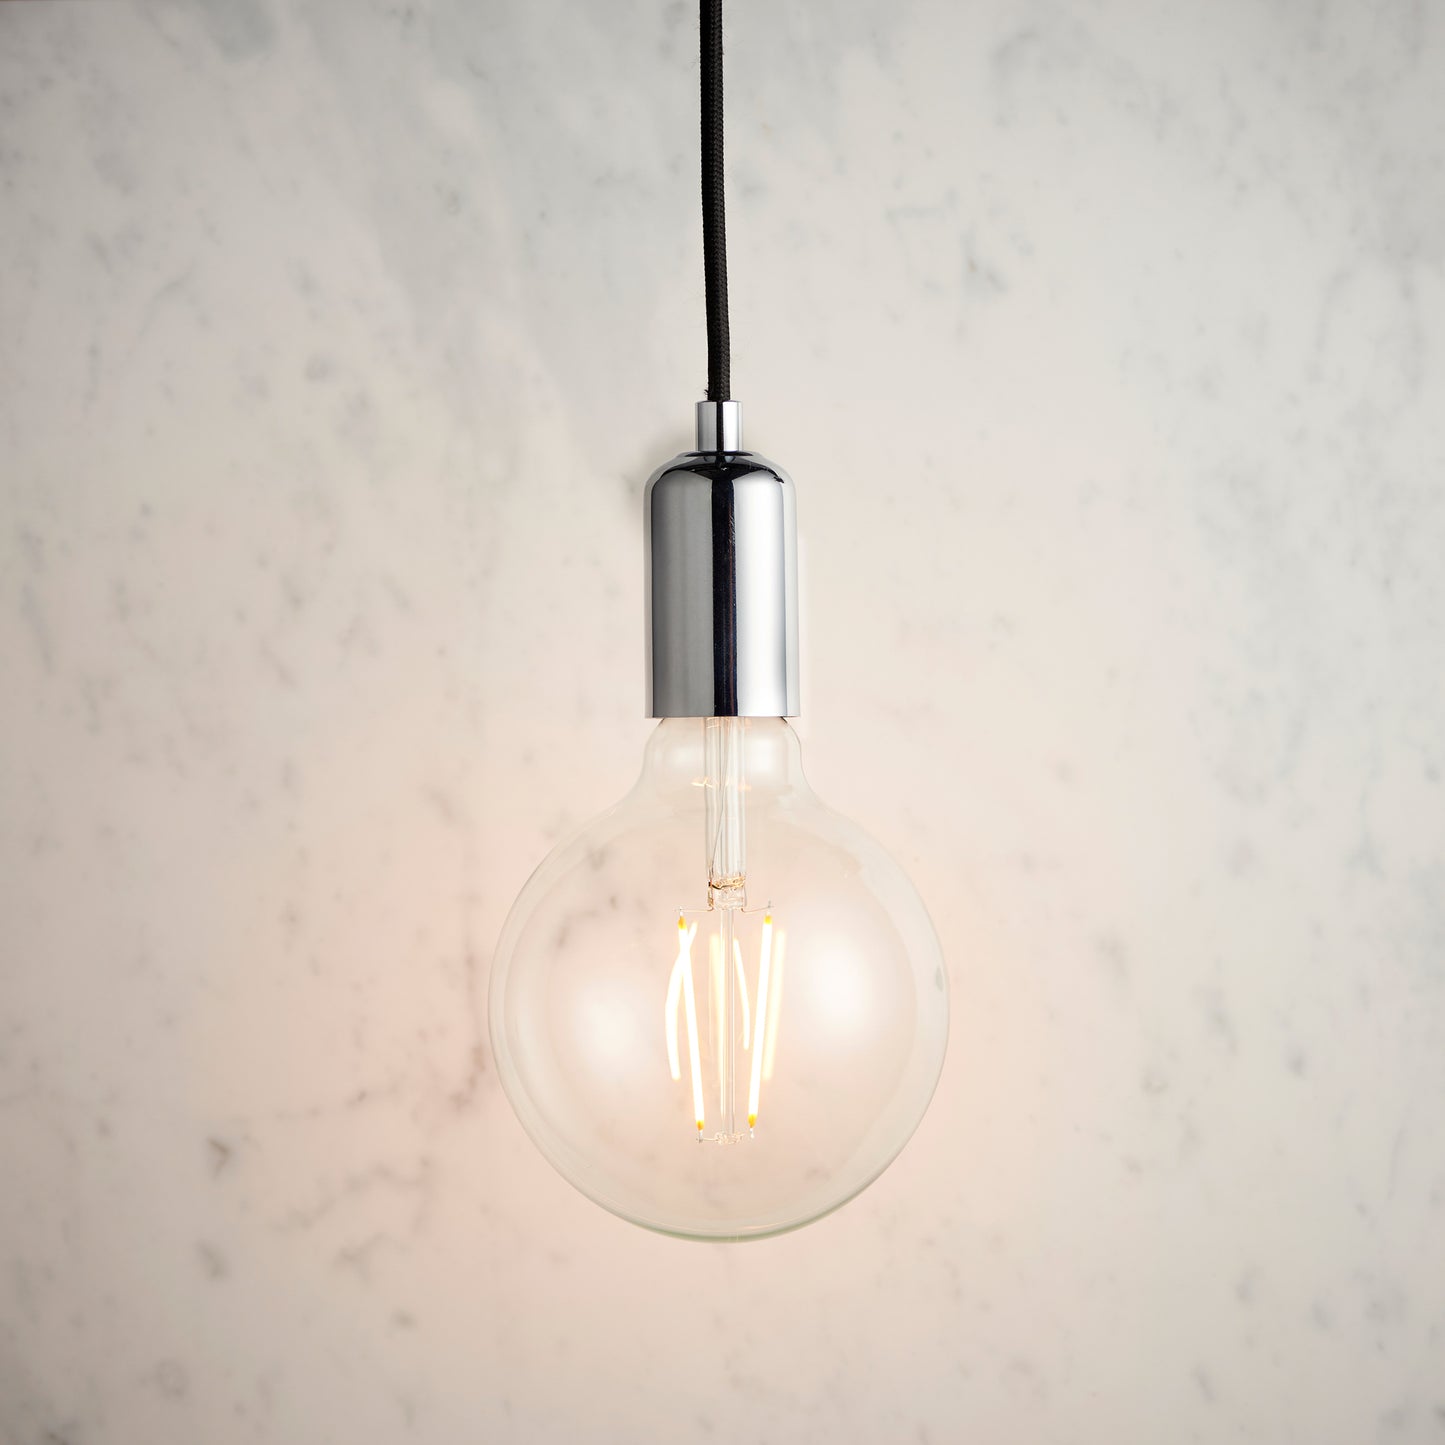 A Studio Pendant Light Chrome hanging on a marble wall, perfect for interior decor and home furniture from Kikiathome.co.uk.